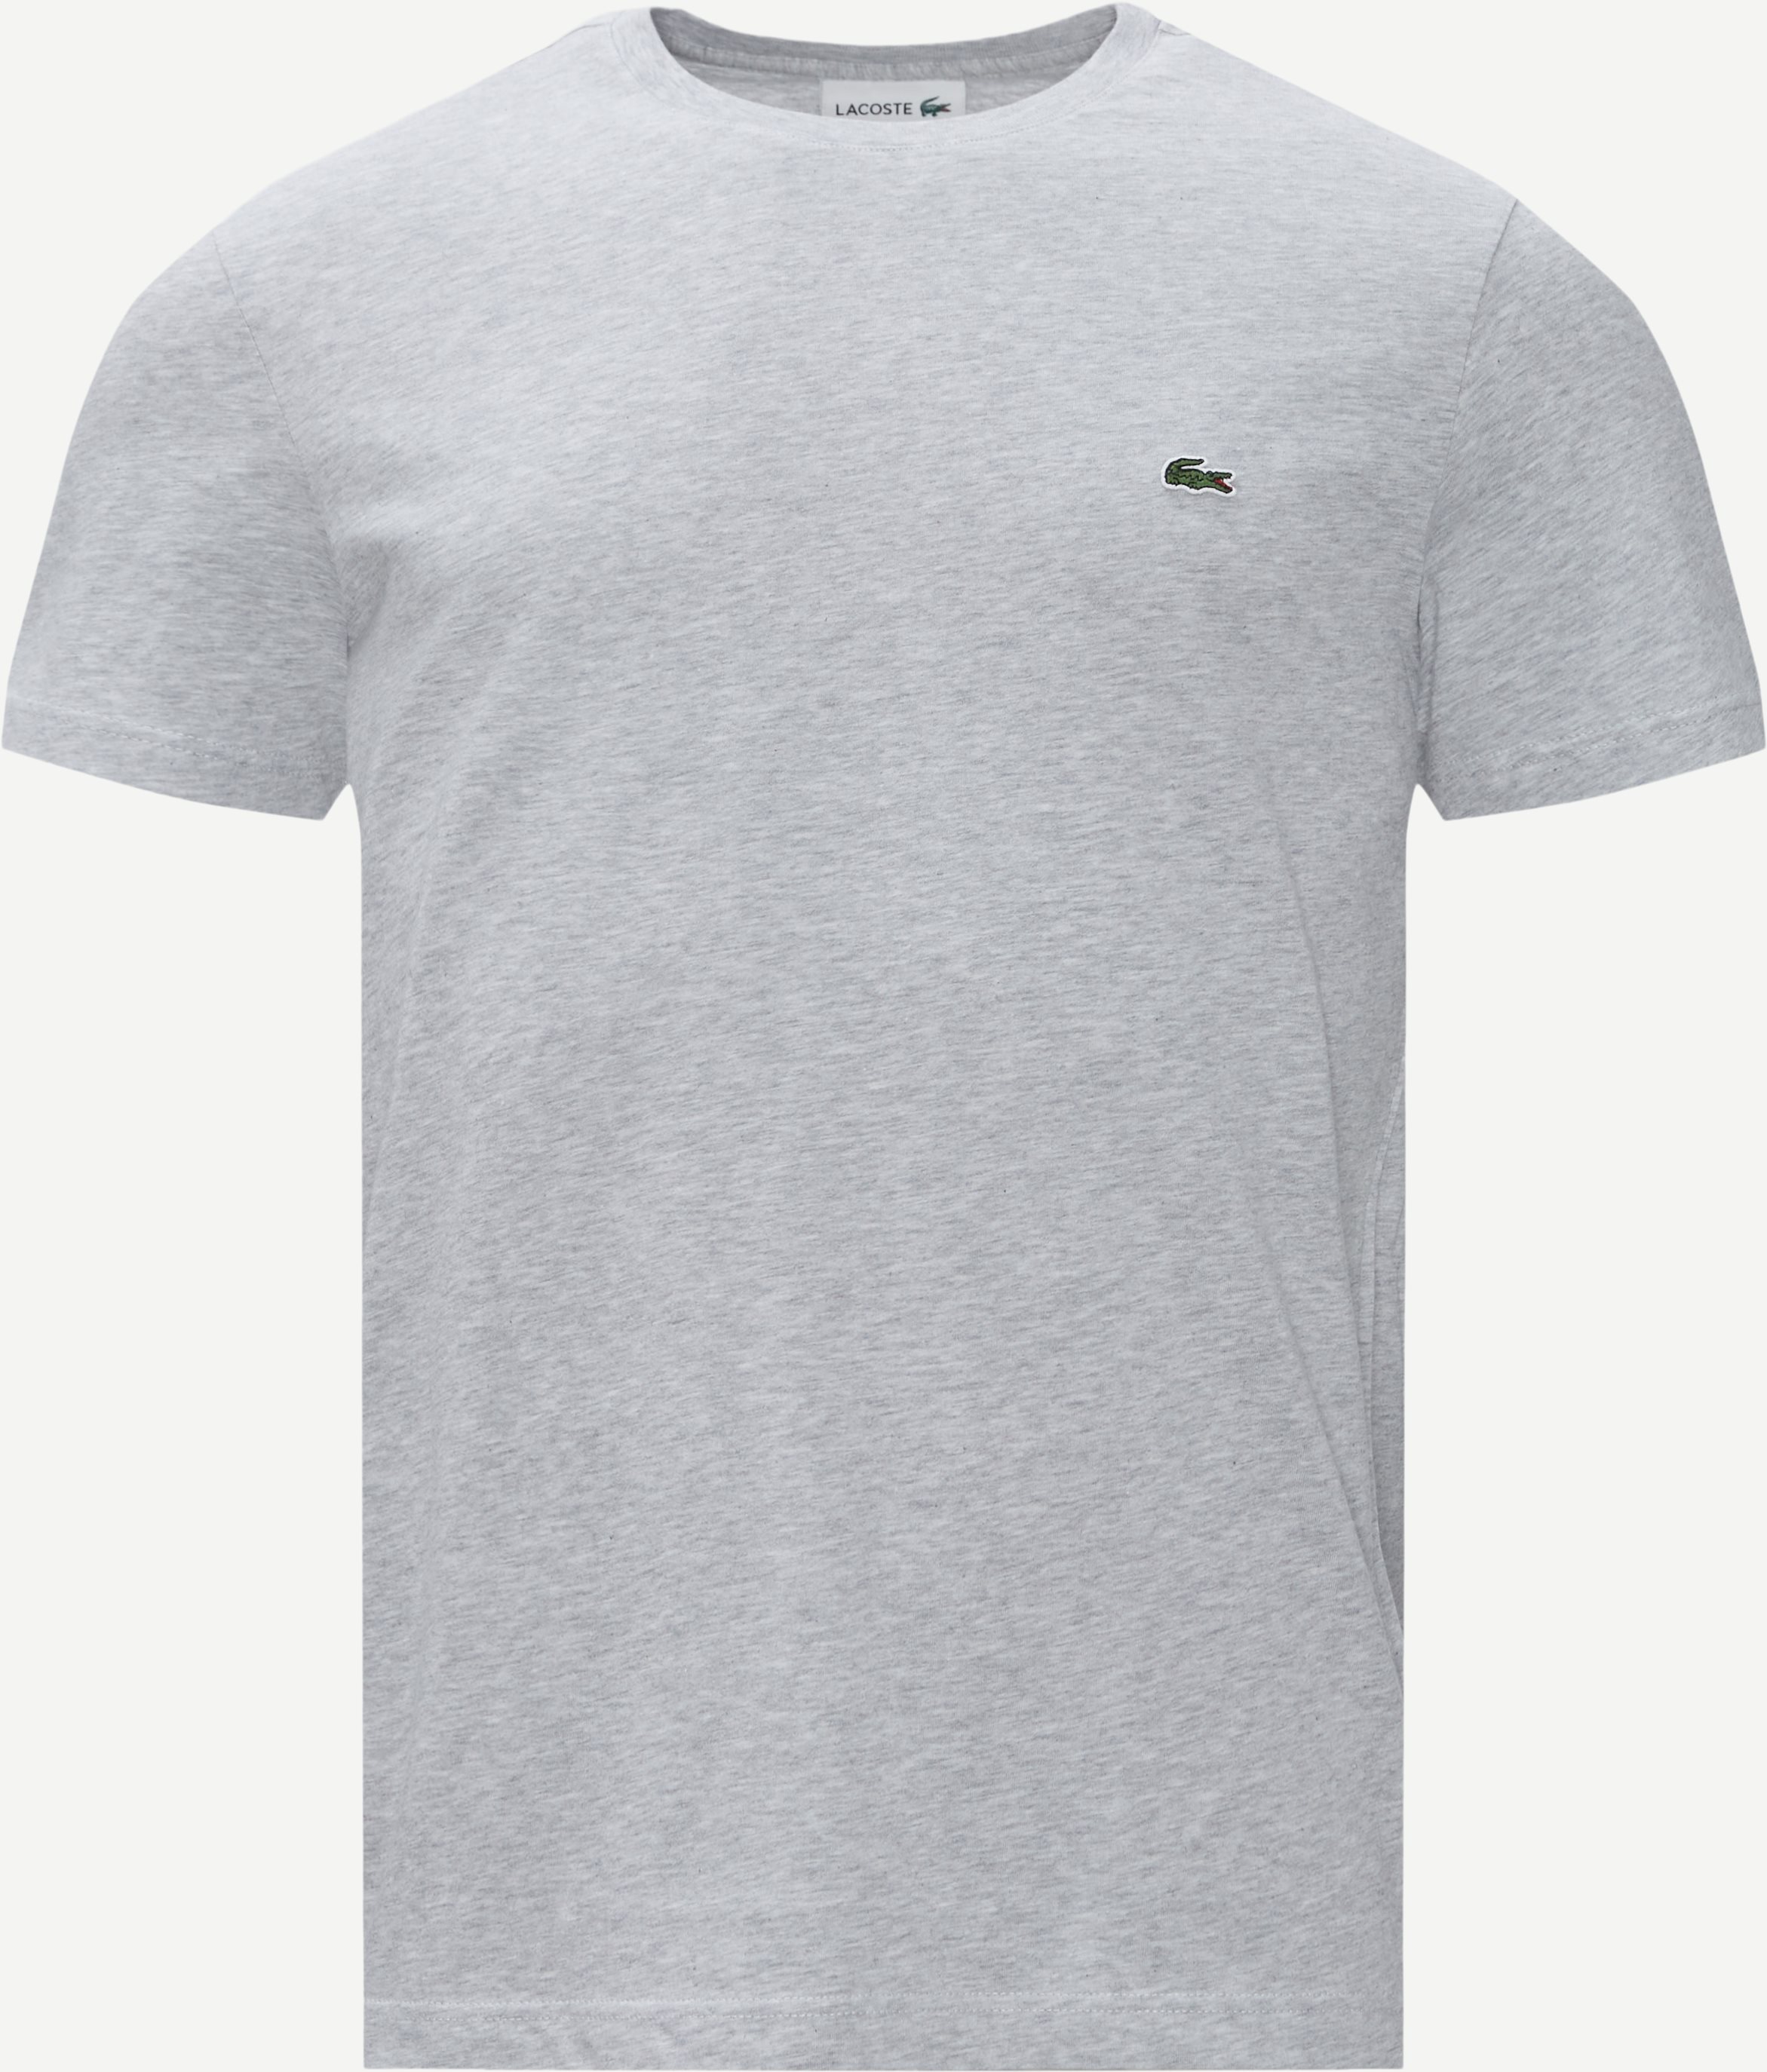 Lacoste T-shirts TH2038 Grey